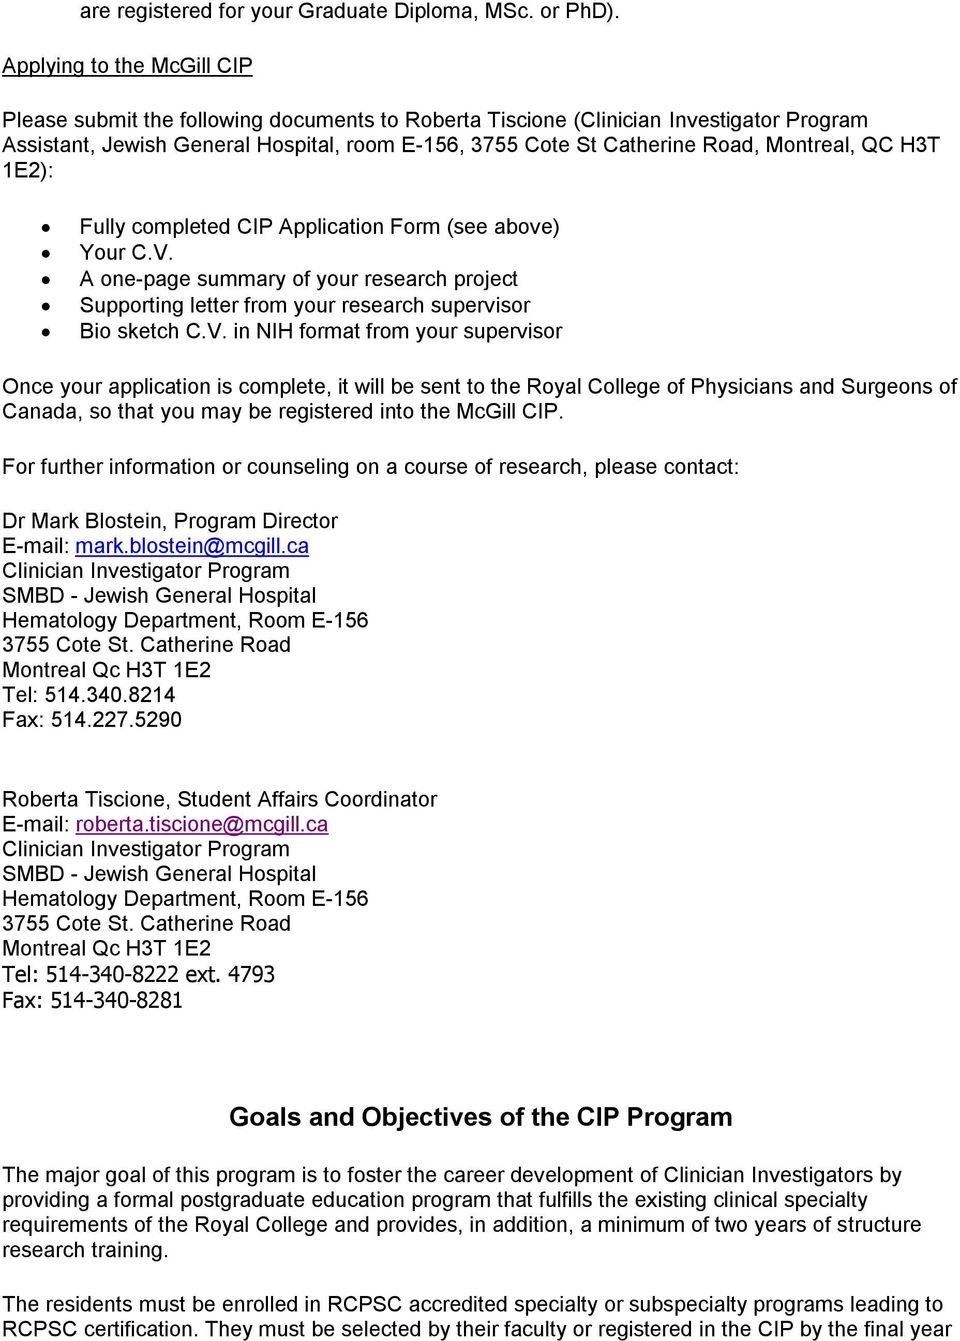 Montreal, QC H3T 1E2): Fully completed CIP Application Form (see above) Your C.V.